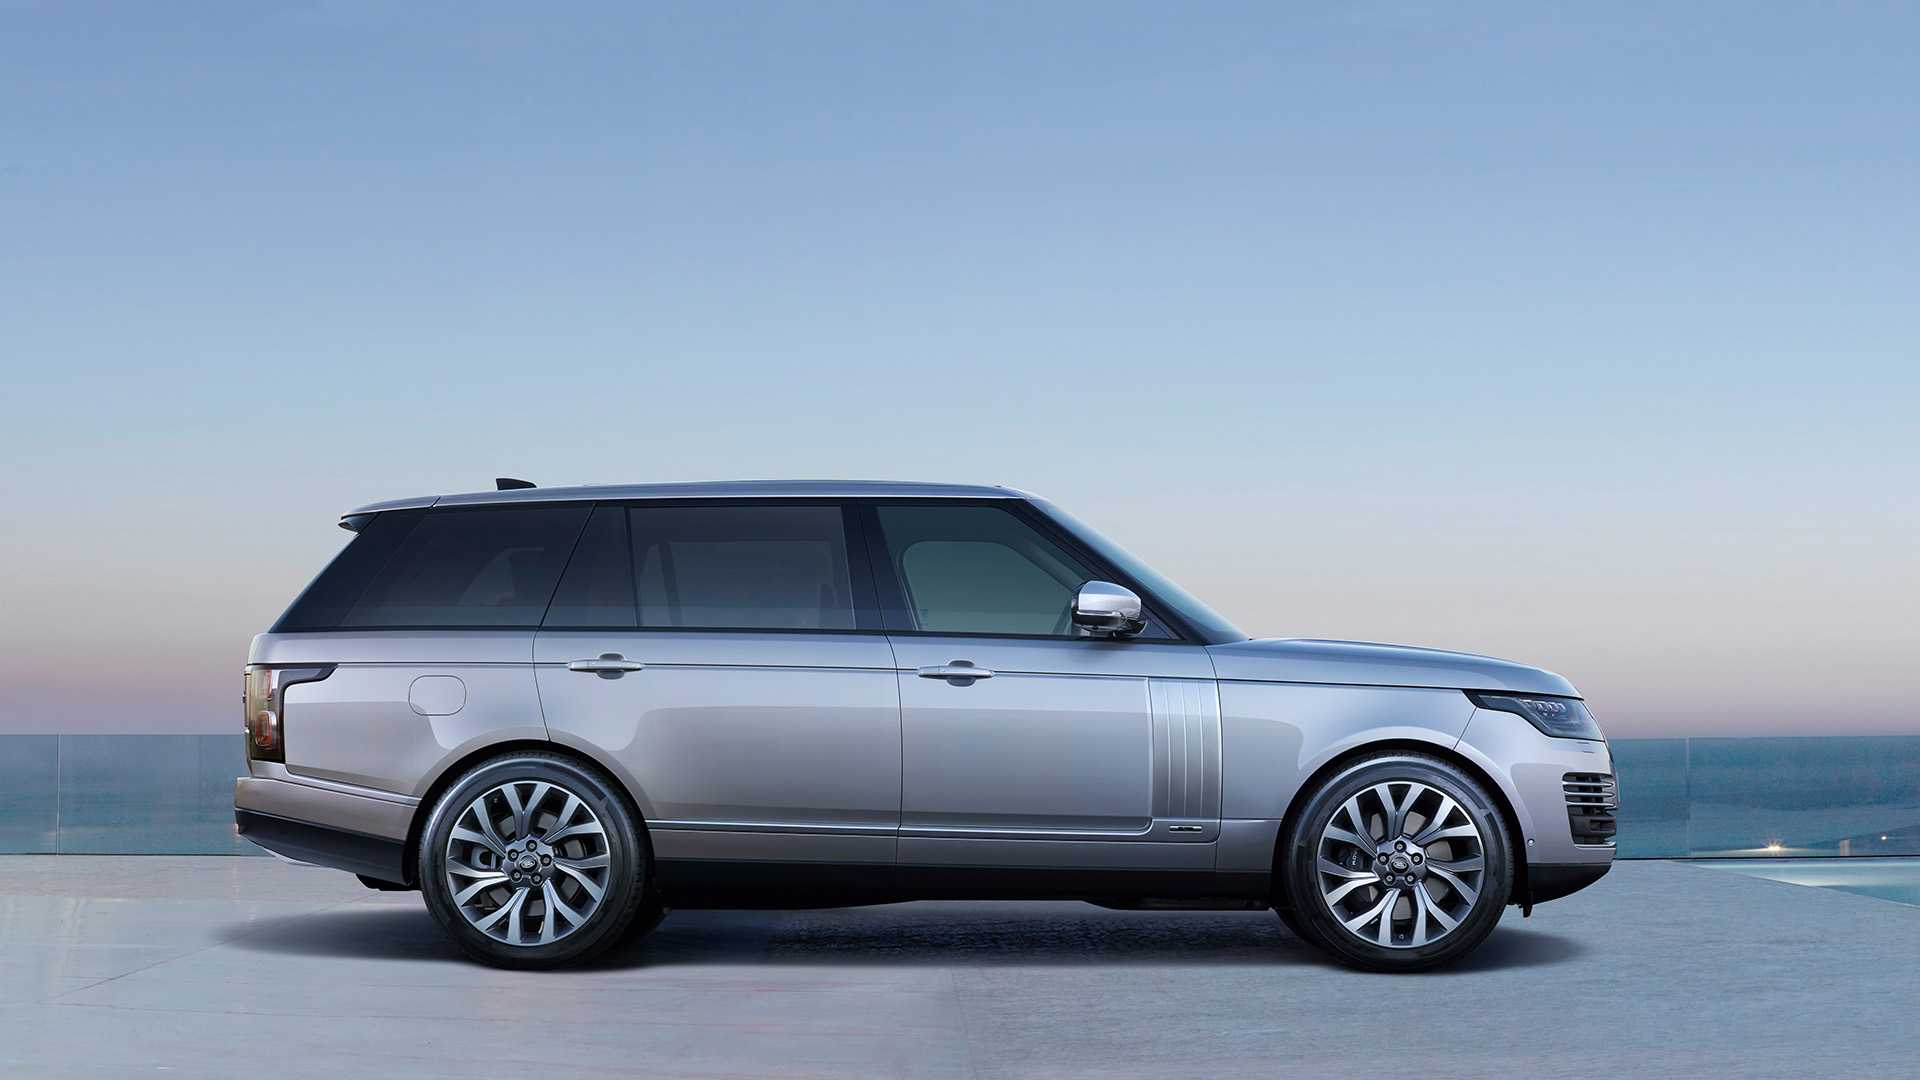 Range Rover And Range Rover Sport Revealed With New Versions